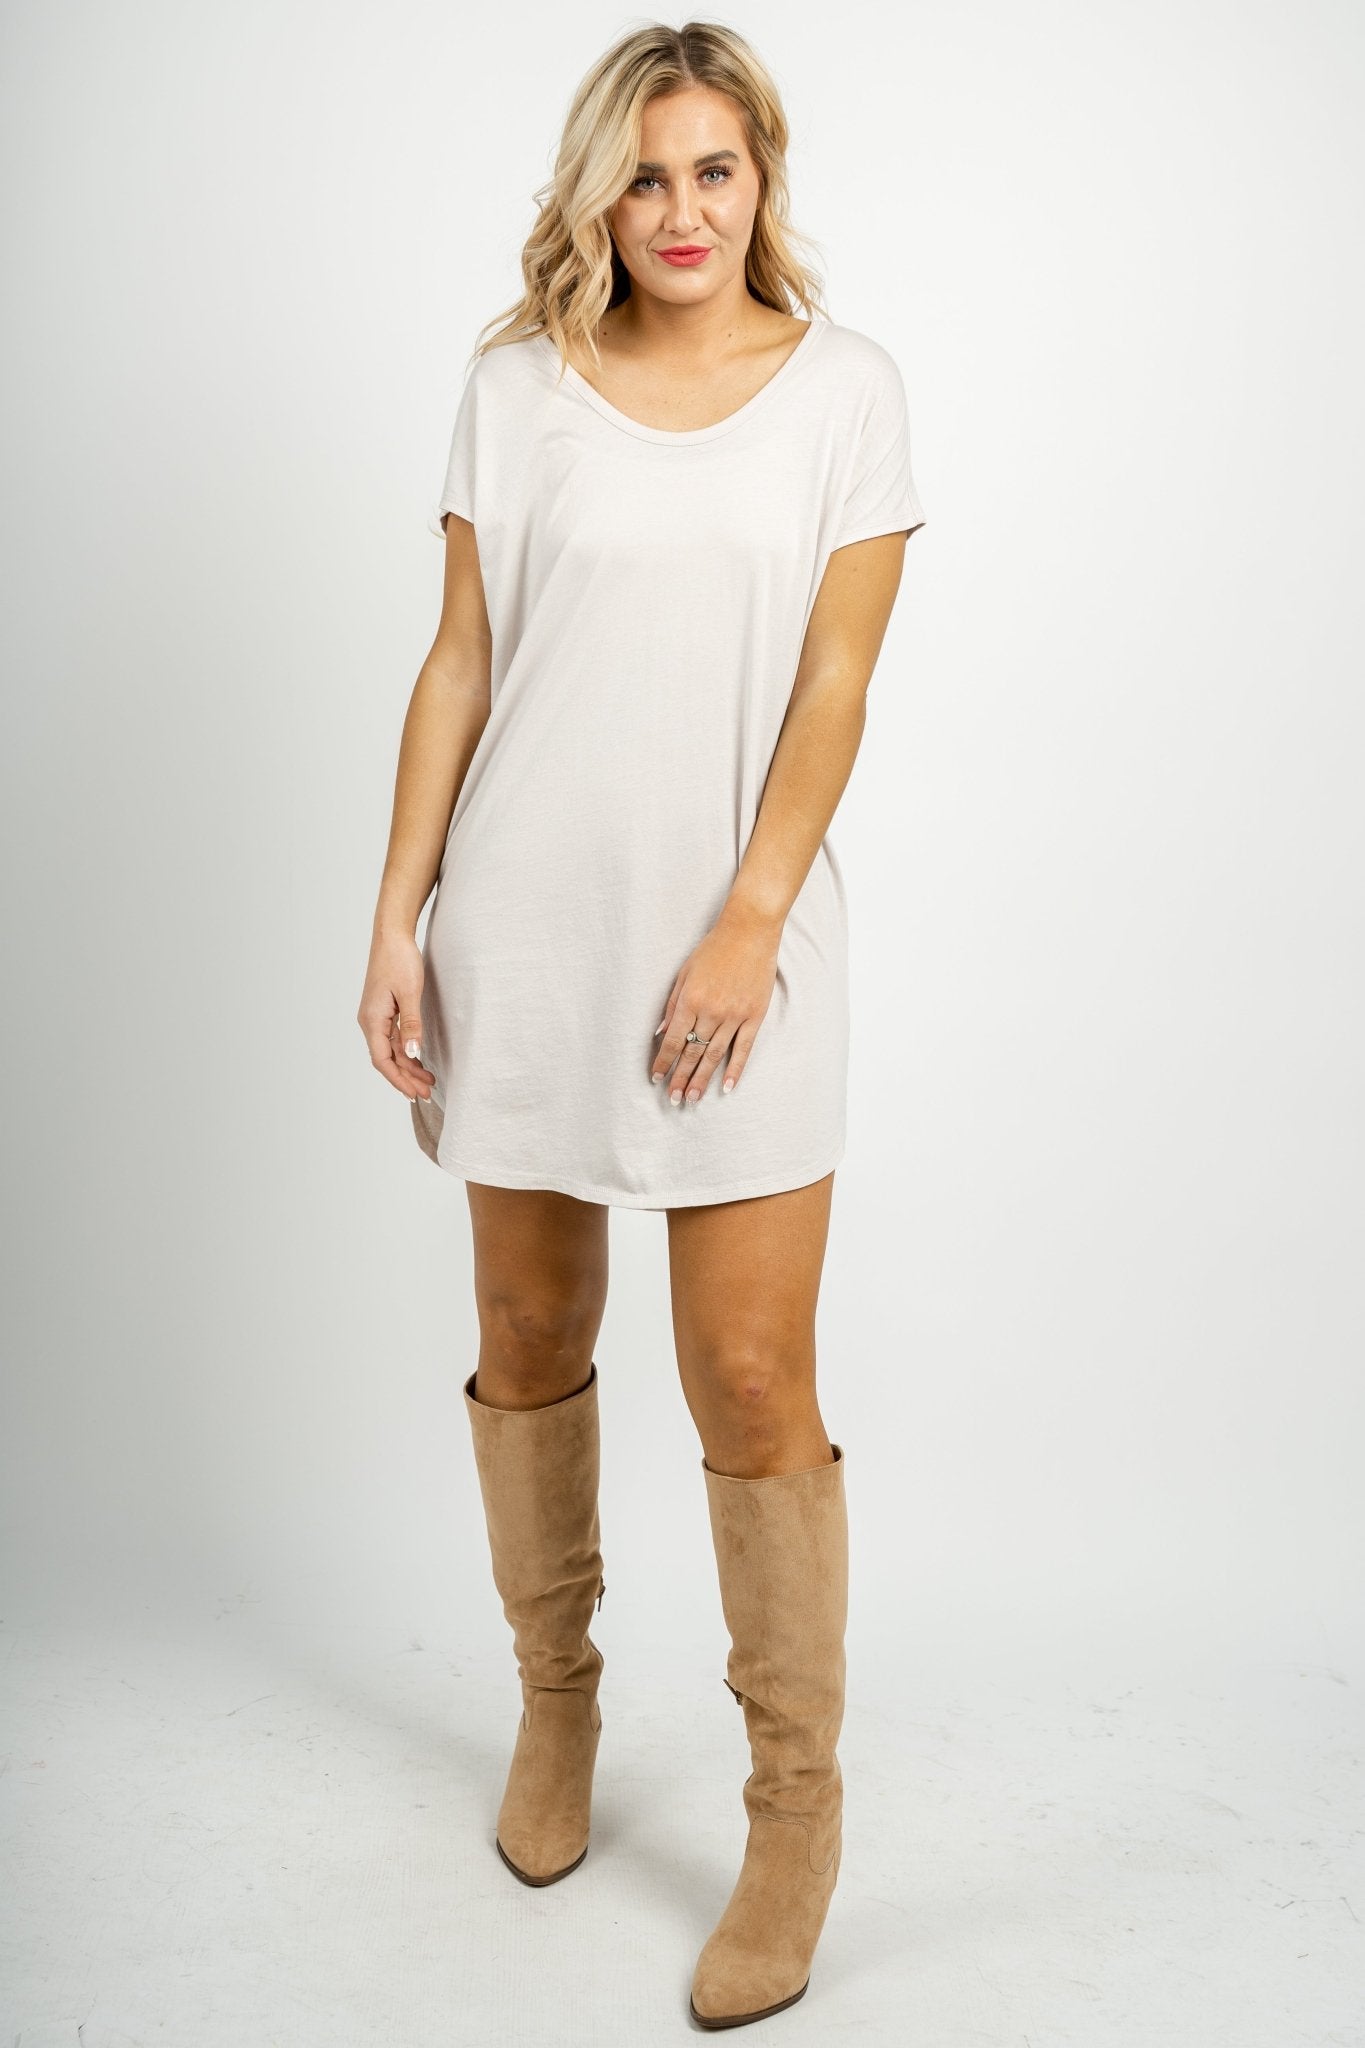 Z Supply organic cotton scoop dress pumice - Z Supply Dress - Z Supply Clothing at Lush Fashion Lounge Trendy Boutique Oklahoma City